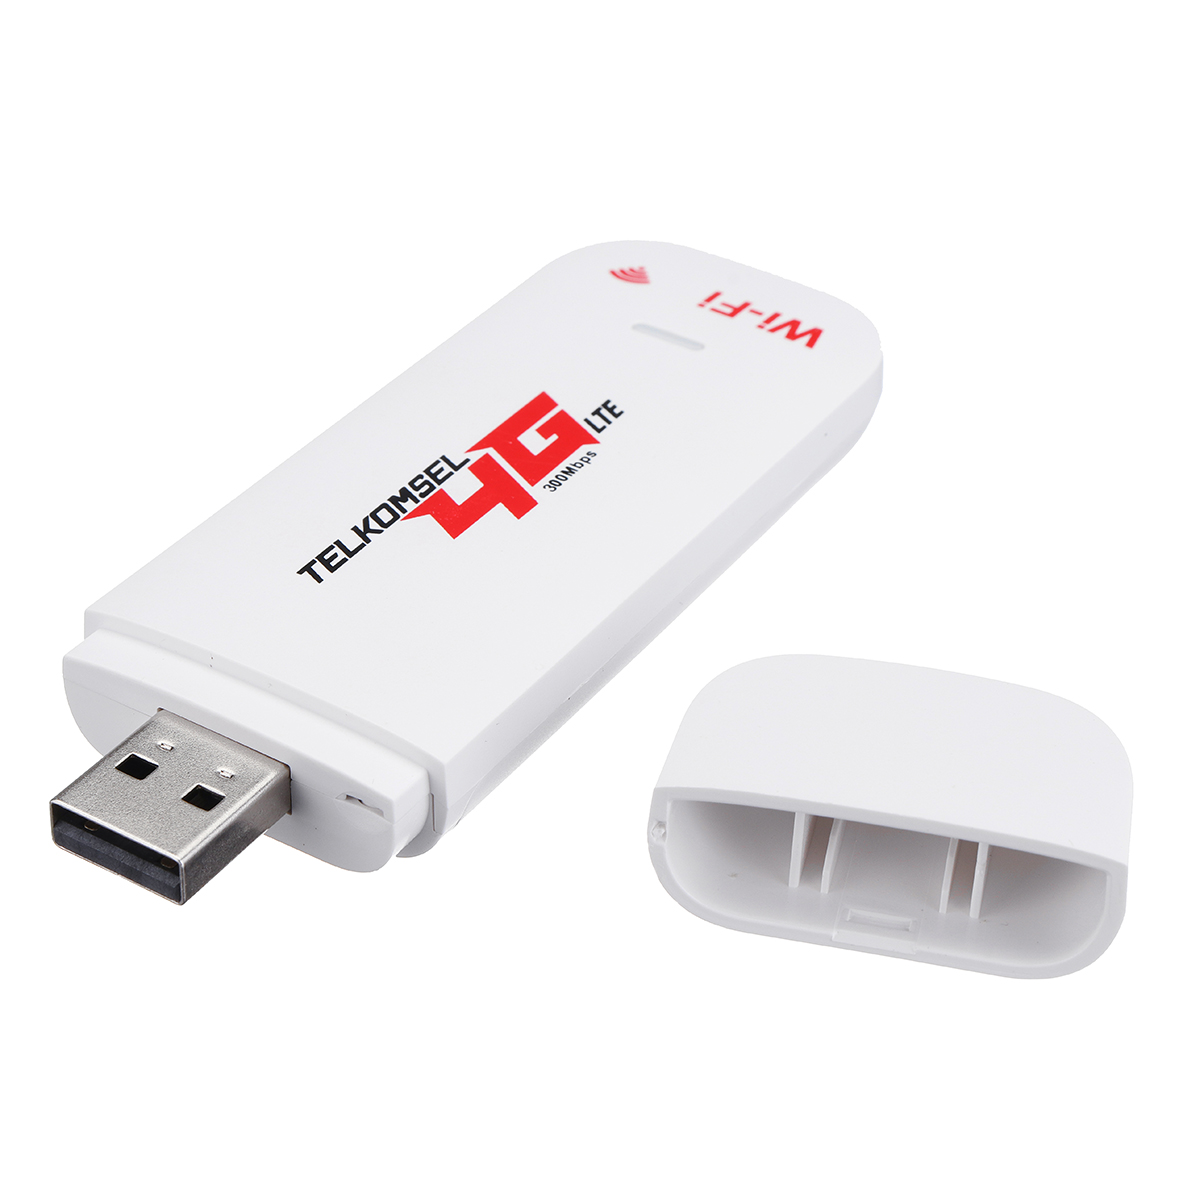 

4G 3G LTE USB 2.0 Wireless Hotspot Mobile Dongle Router with SIM TF Card Slot for Mobile Phone Tablet